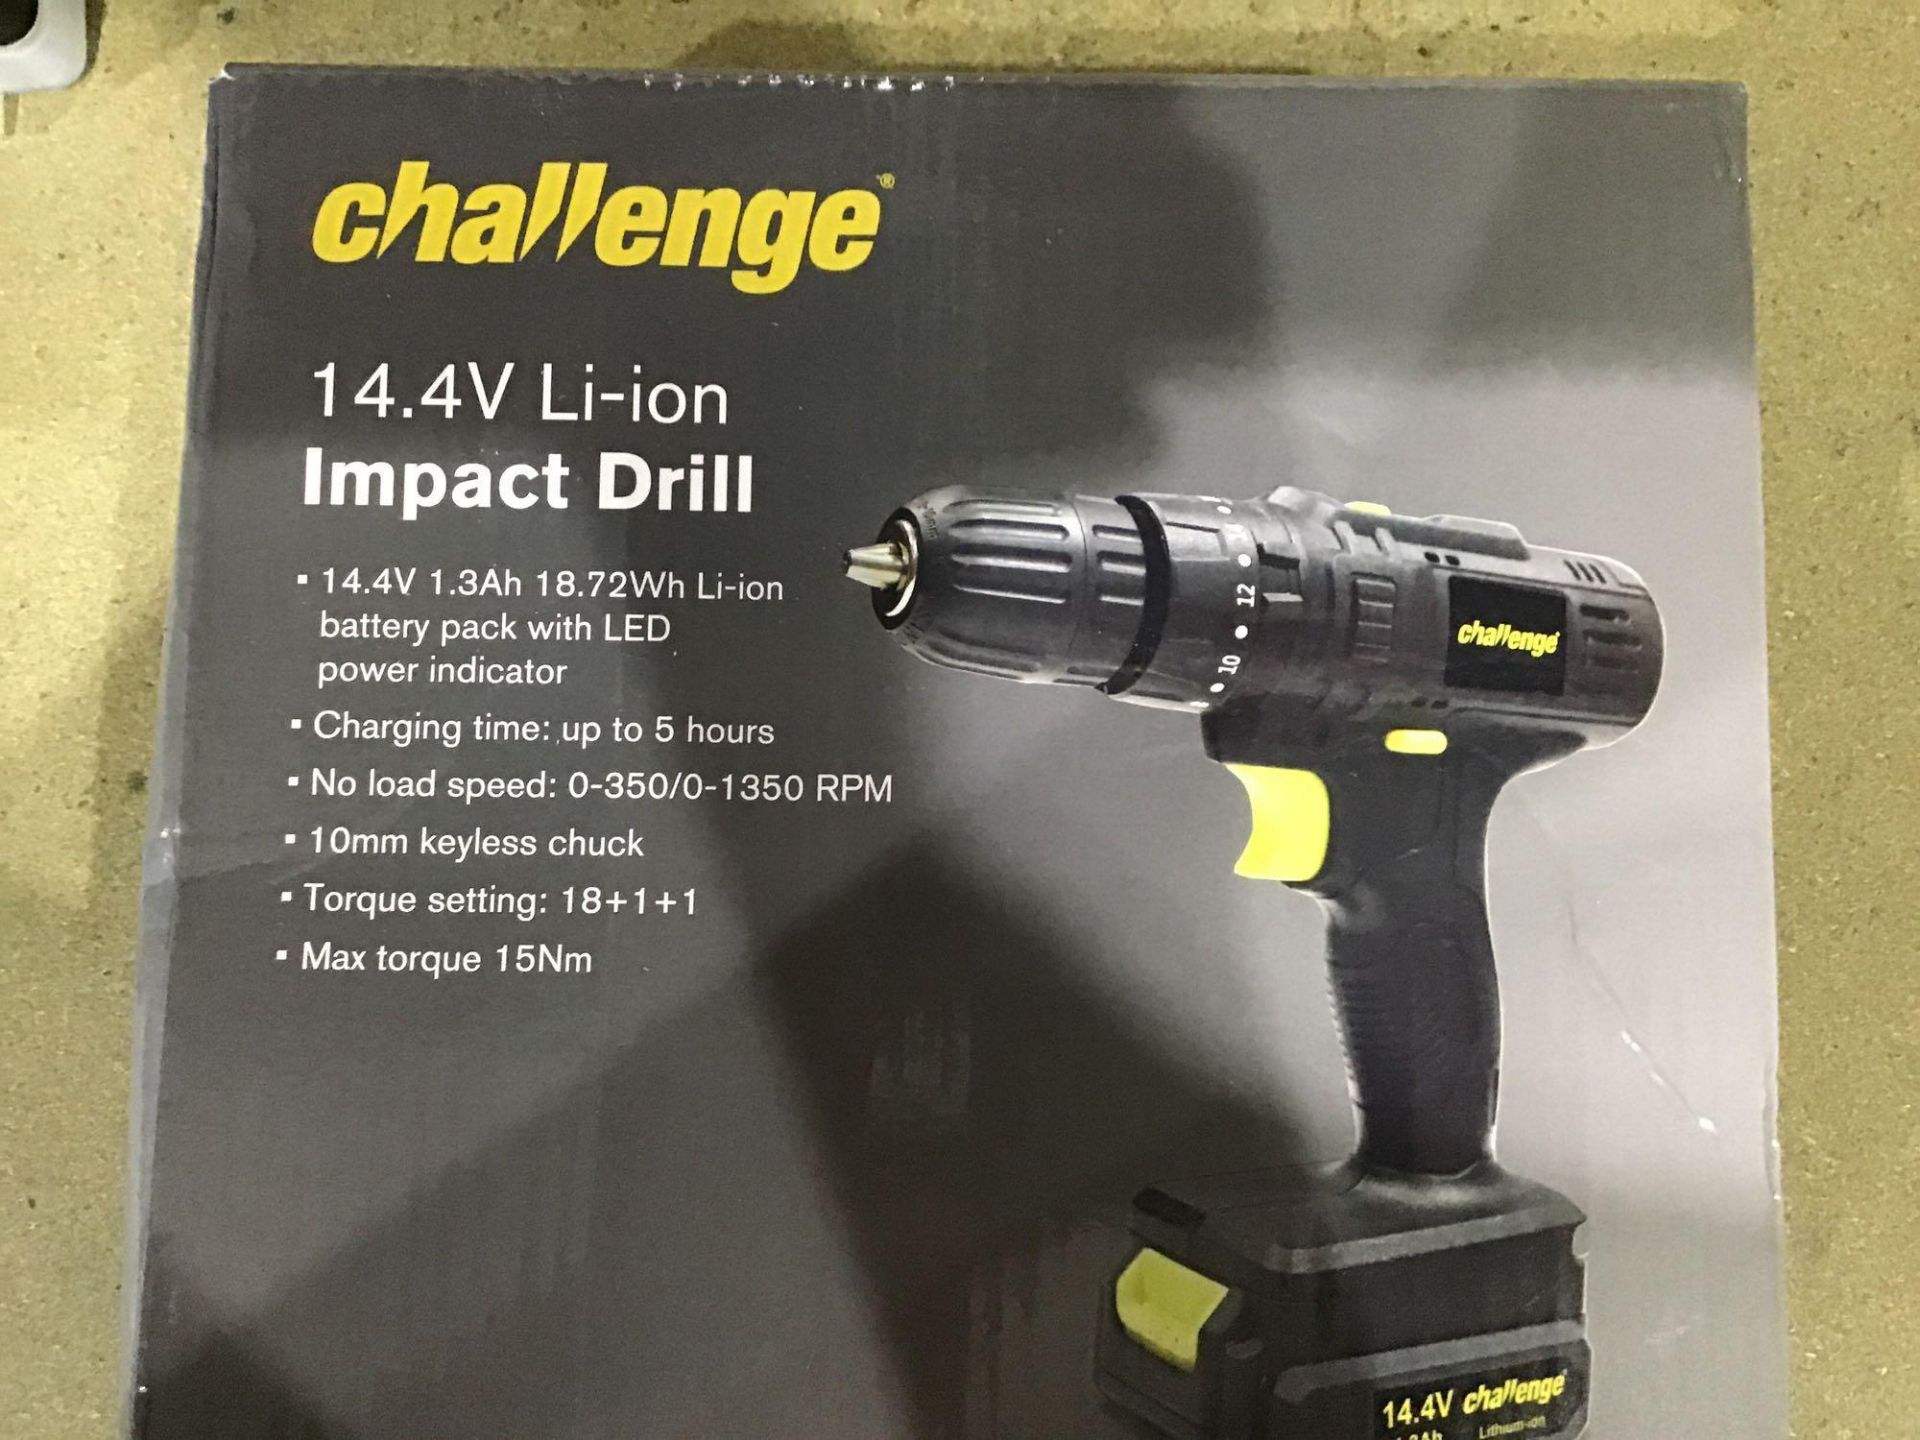 Challenge Cordless Impact Drill - 14.4V - £30.00 RRP - Image 2 of 3